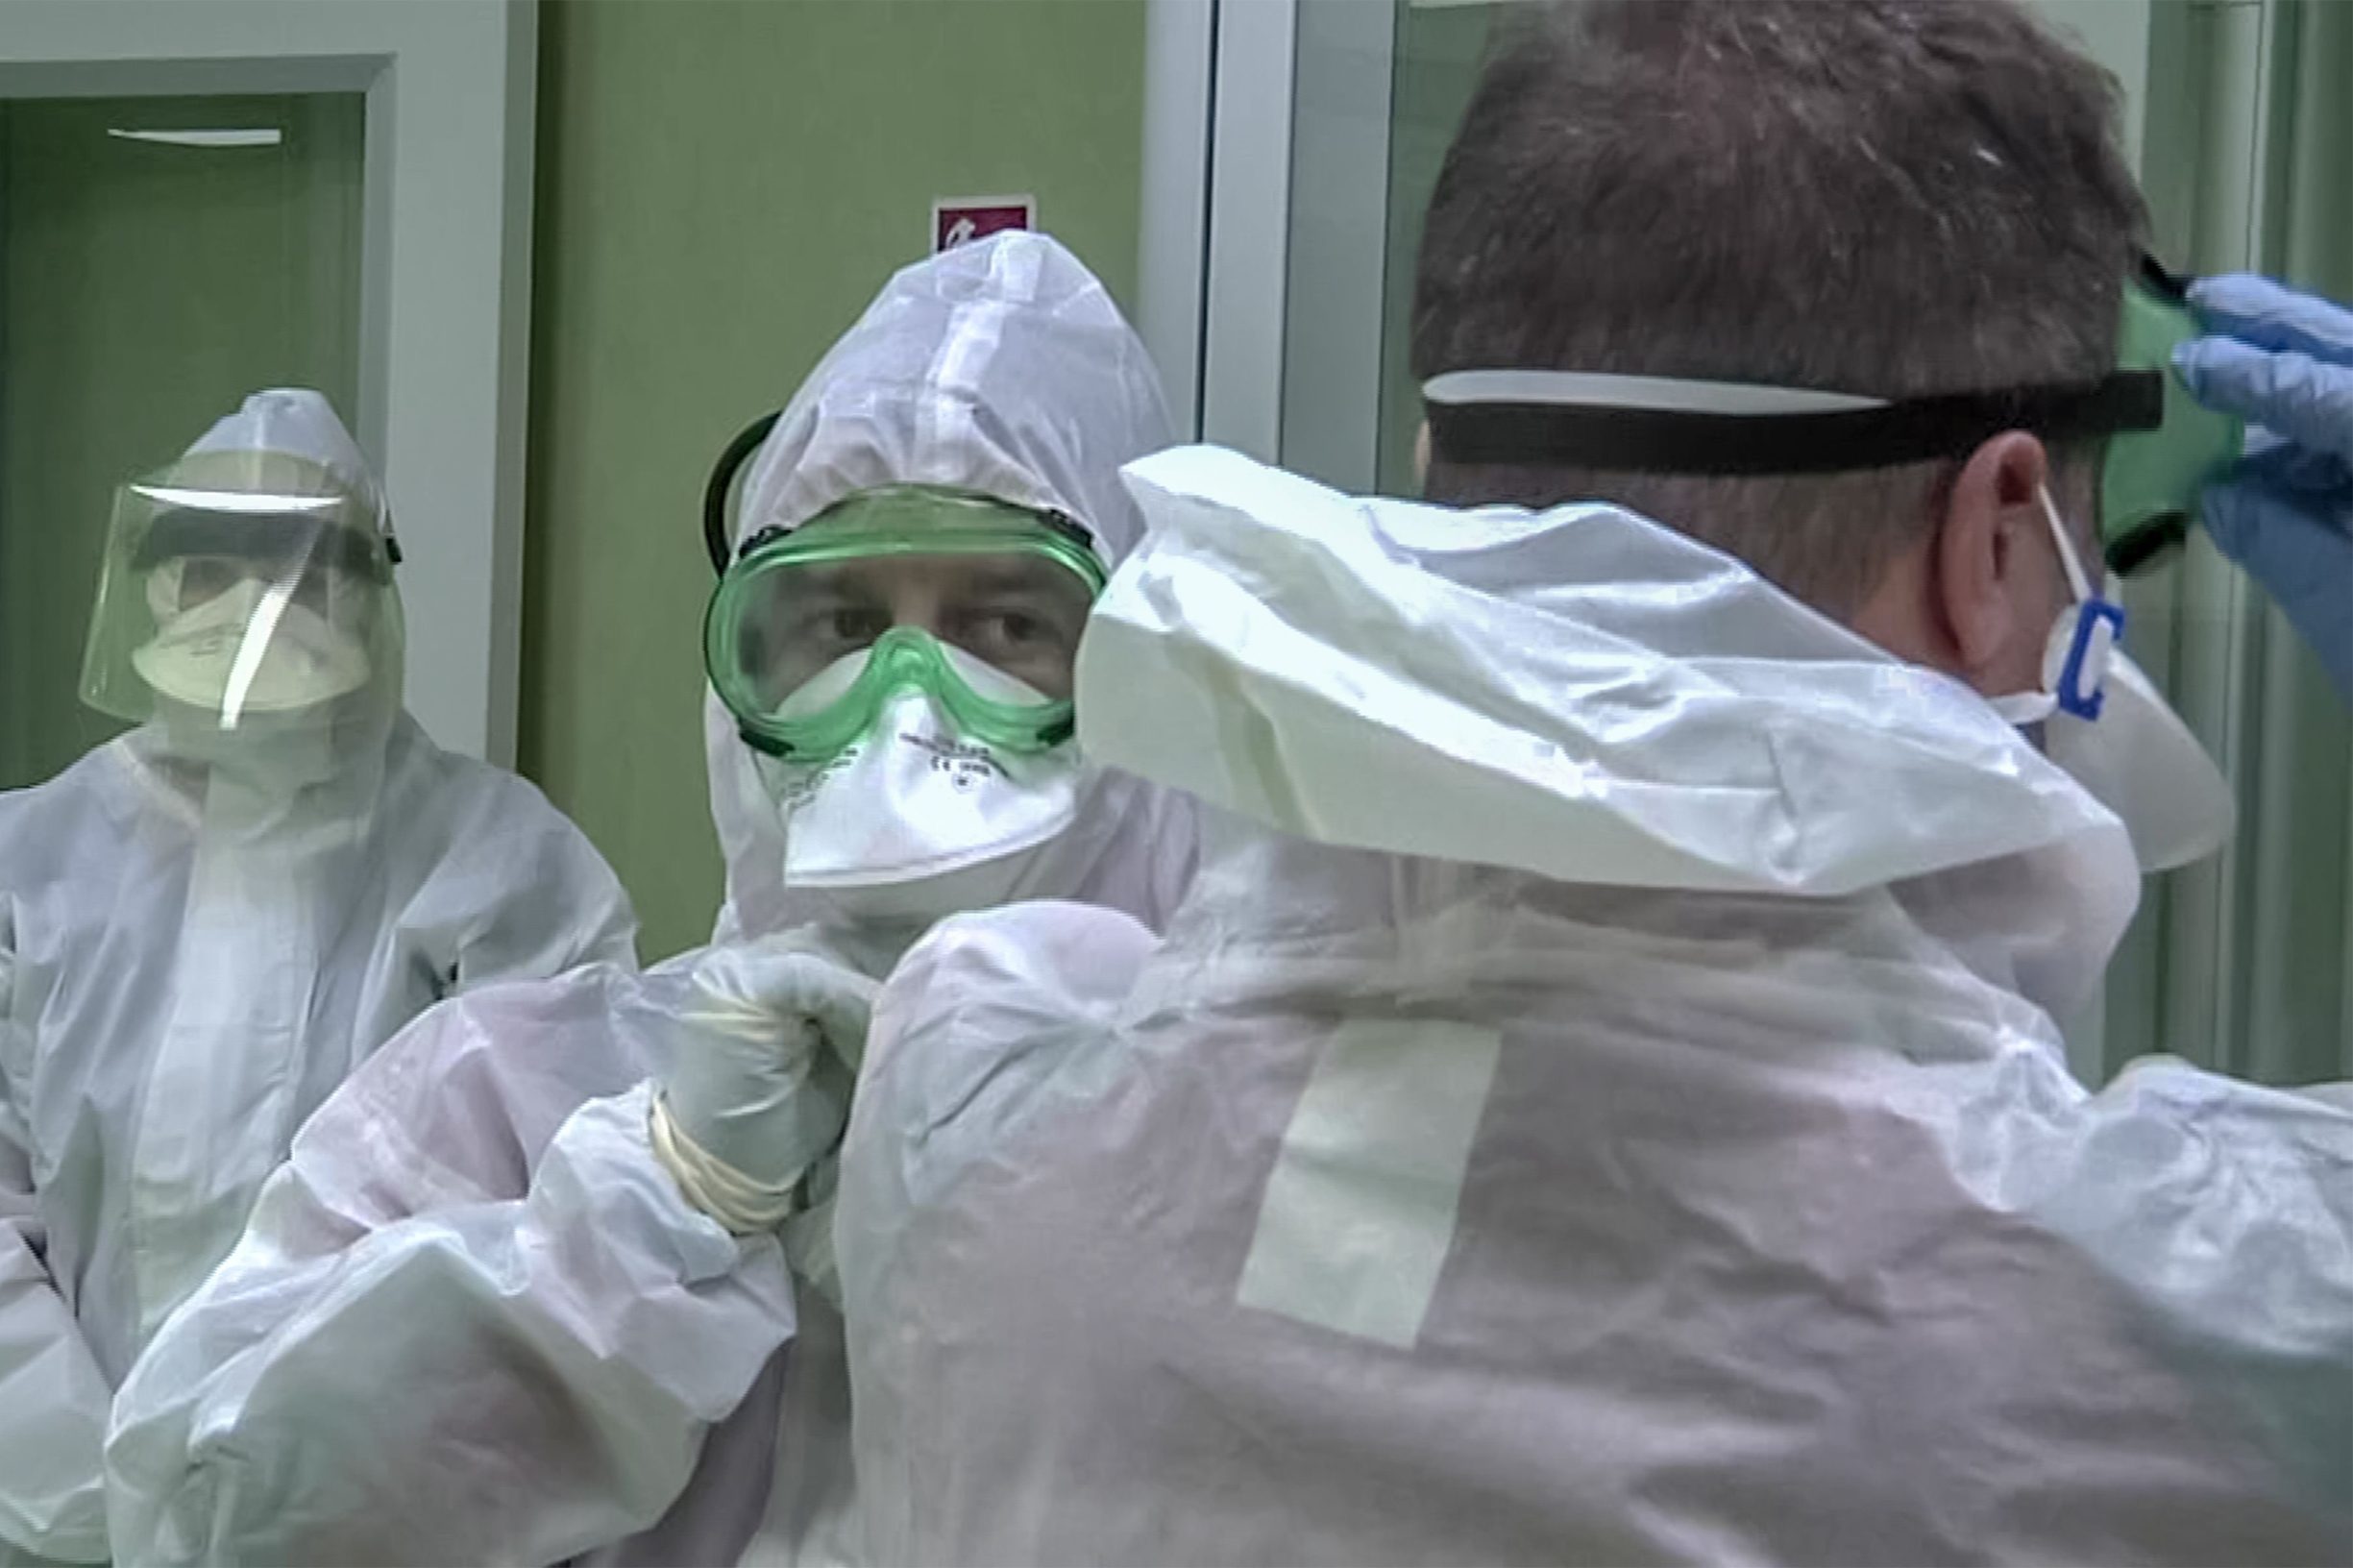 This photo grabbed from a video taken and handout on January 23, 2020 by Rome's Fiumicino Airport Authority (ADR) shows members of the Italian Red Cross putting on their protective gear, getting ready to apply health measures and procedures against deadly SARS-like virus outbreak risks, on passengers that landed at Rome's Fiumicino airport on a southern airlines flight from Wuhan, China. - China banned trains and planes from leaving a major city at the centre of a virus outbreak on January 23, seeking to seal off its 11 million people to contain the contagious disease that has claimed 17 lives, infected hundreds and spread to other countries. (Photo by Handout / AEROPORTO DI ROMA / AFP) / RESTRICTED TO EDITORIAL USE - MANDATORY CREDIT 